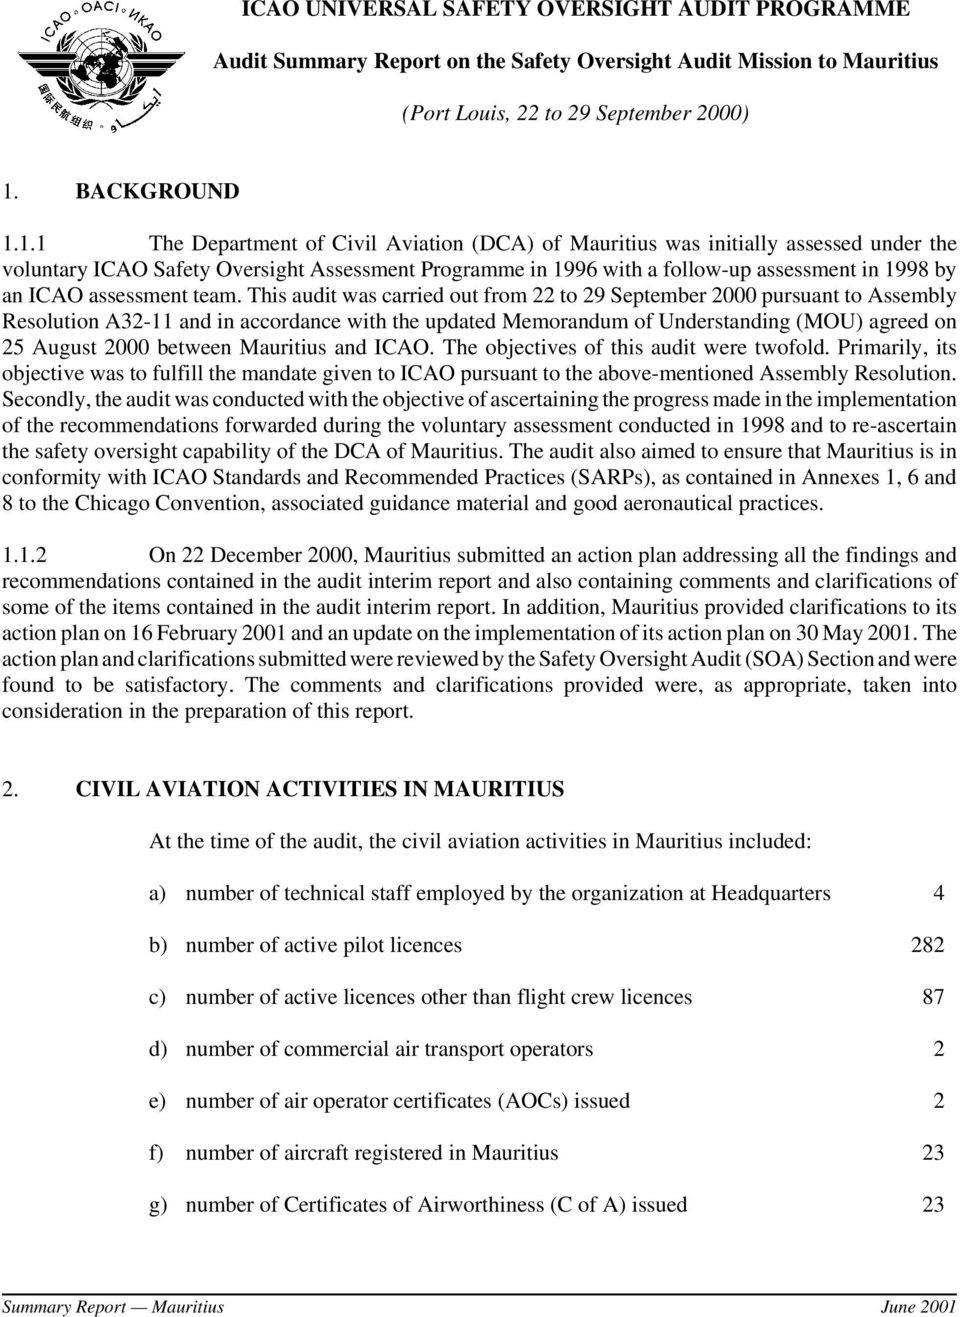 1.1 The Department of Civil Aviation (DCA) of Mauritius was initially assessed under the voluntary ICAO Safety Oversight Assessment Programme in 1996 with a follow-up assessment in 1998 by an ICAO